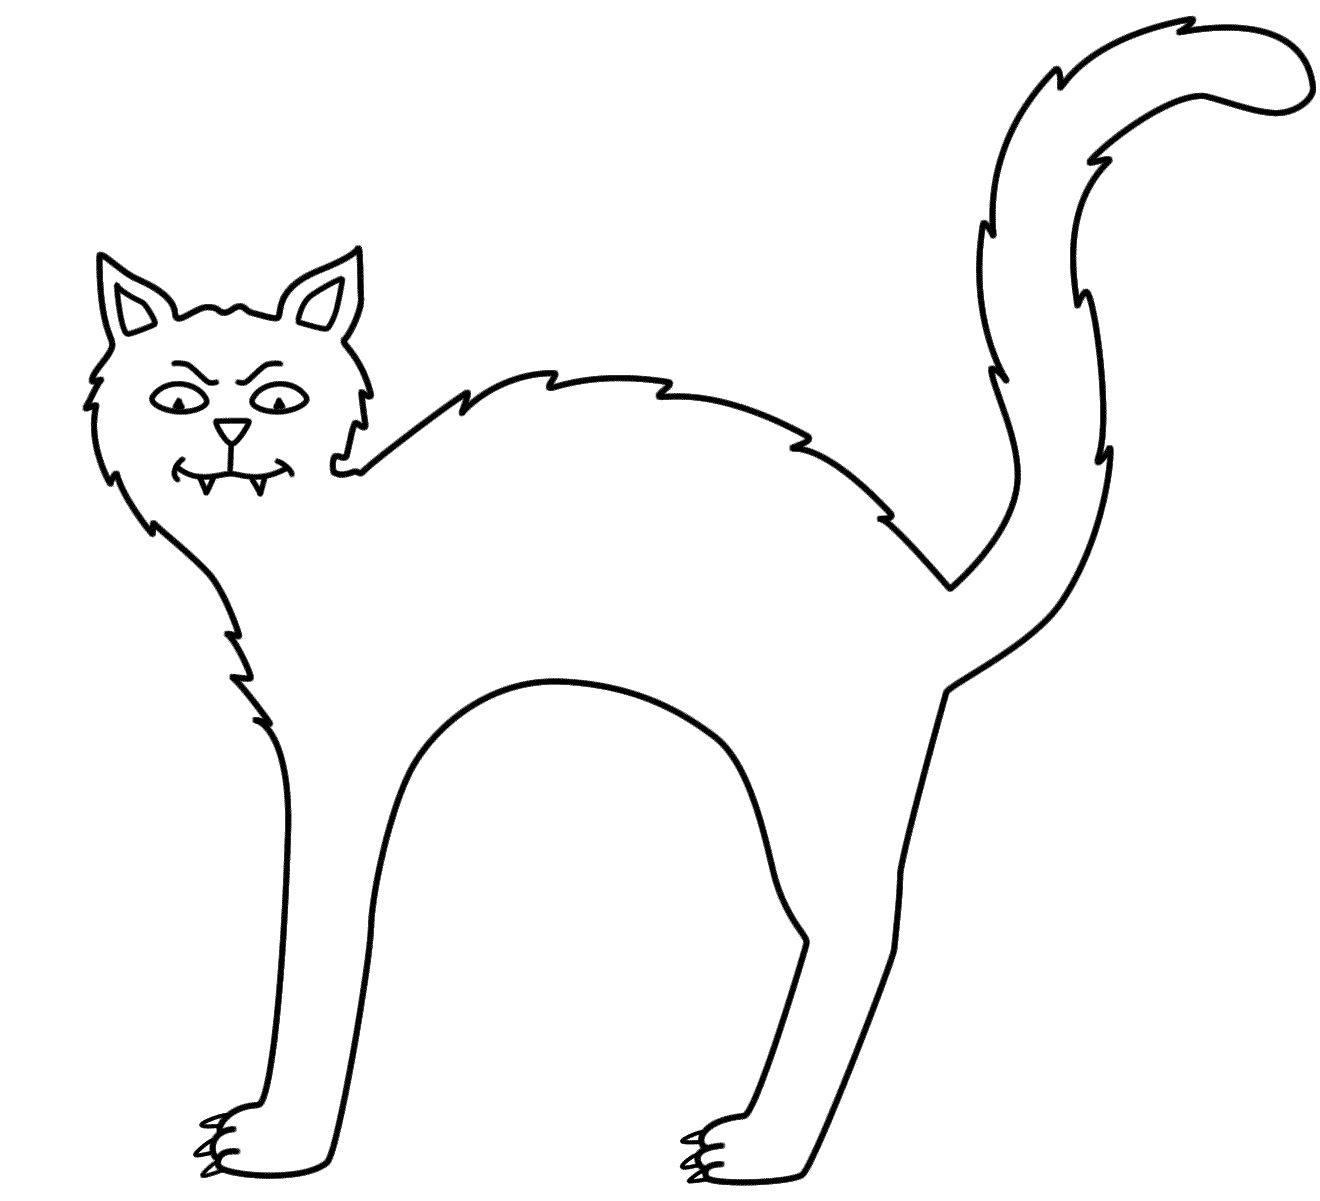 Black Cat Image Coloring Page